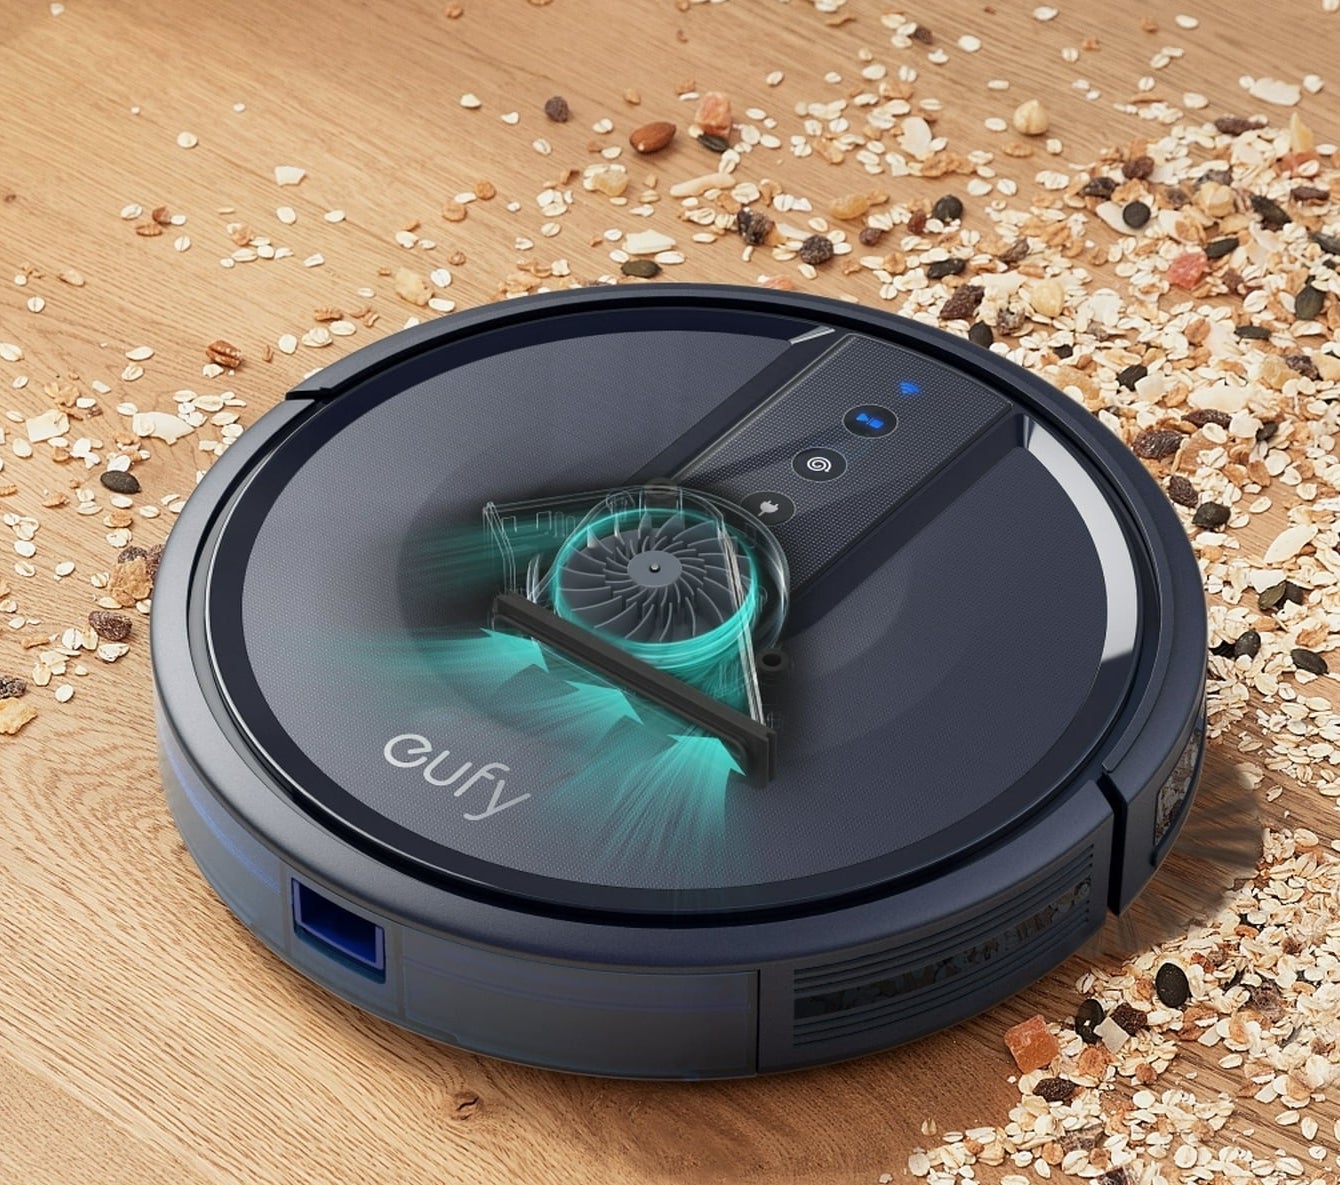 A robot vacuum cleaning a path through a pile of granola